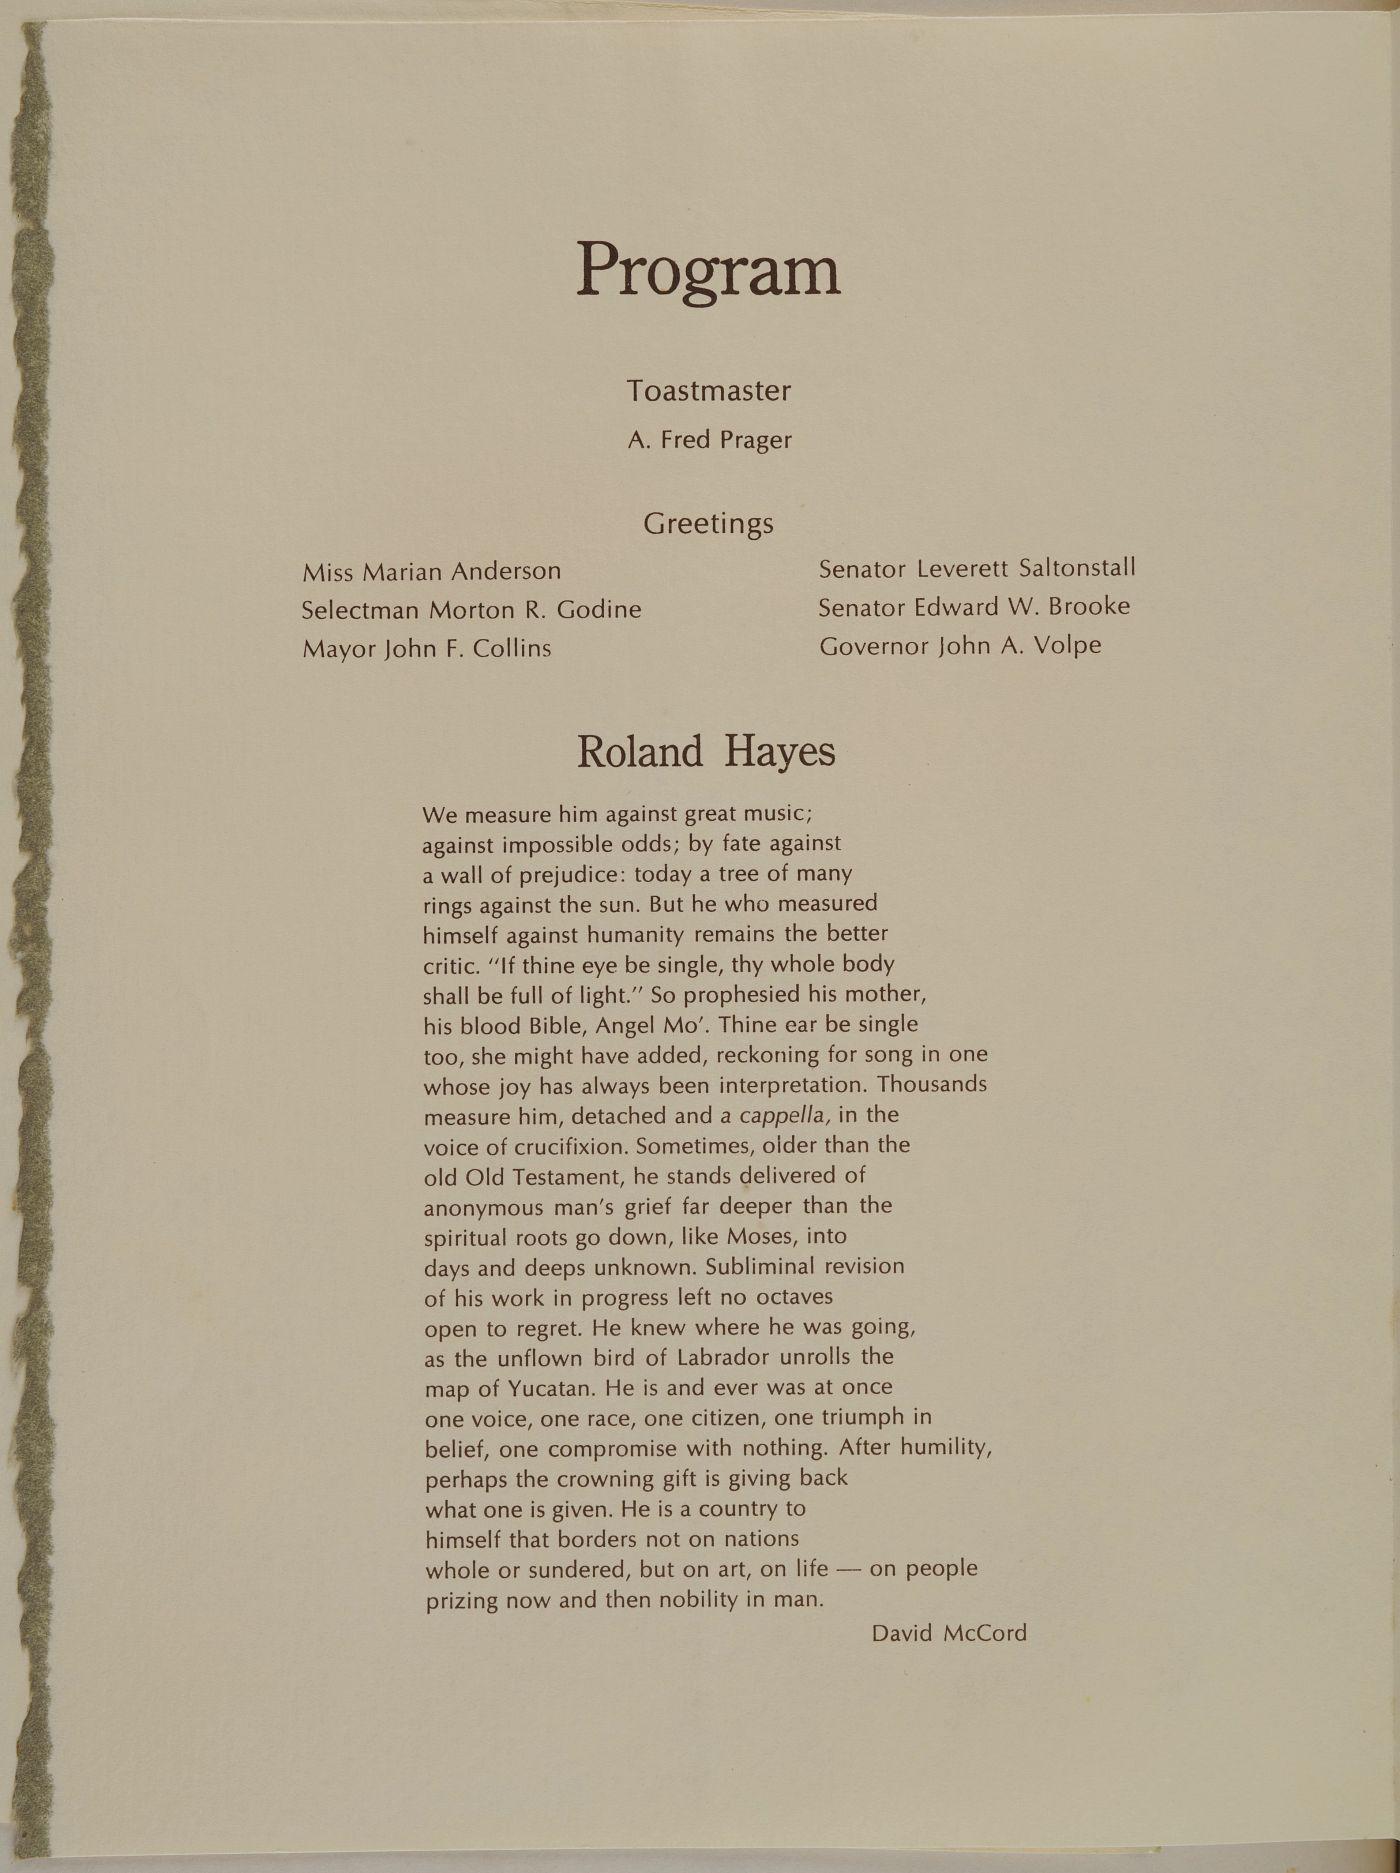 Interior of program for the birthday celebration at the Gardner Museum, with a schedule for the event, and a poem about Roland Hayes.